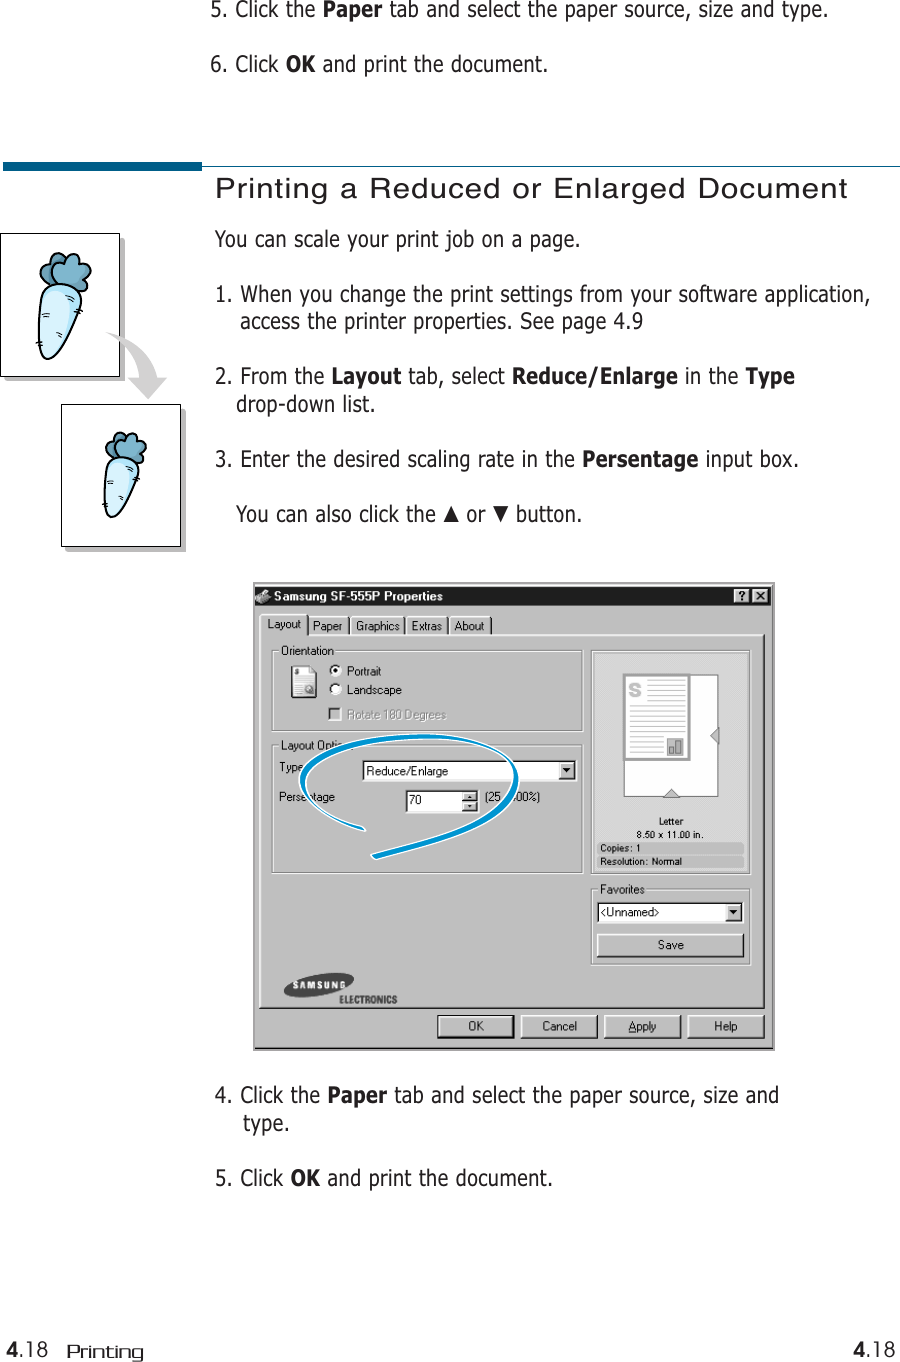 4.18 Printing 4.184. Click the Paper tab and select the paper source, size and type.5. Click OK and print the document.Printing a Reduced or Enlarged DocumentYou can scale your print job on a page. 1. When you change the print settings from your software application,access the printer properties. See page 4.92. From the Layout tab, select Reduce/Enlarge in the Typedrop-down list. 3. Enter the desired scaling rate in the Persentage input box. You can also click the ▲or ▼button.5. Click the Paper tab and select the paper source, size and type.6. Click OK and print the document.